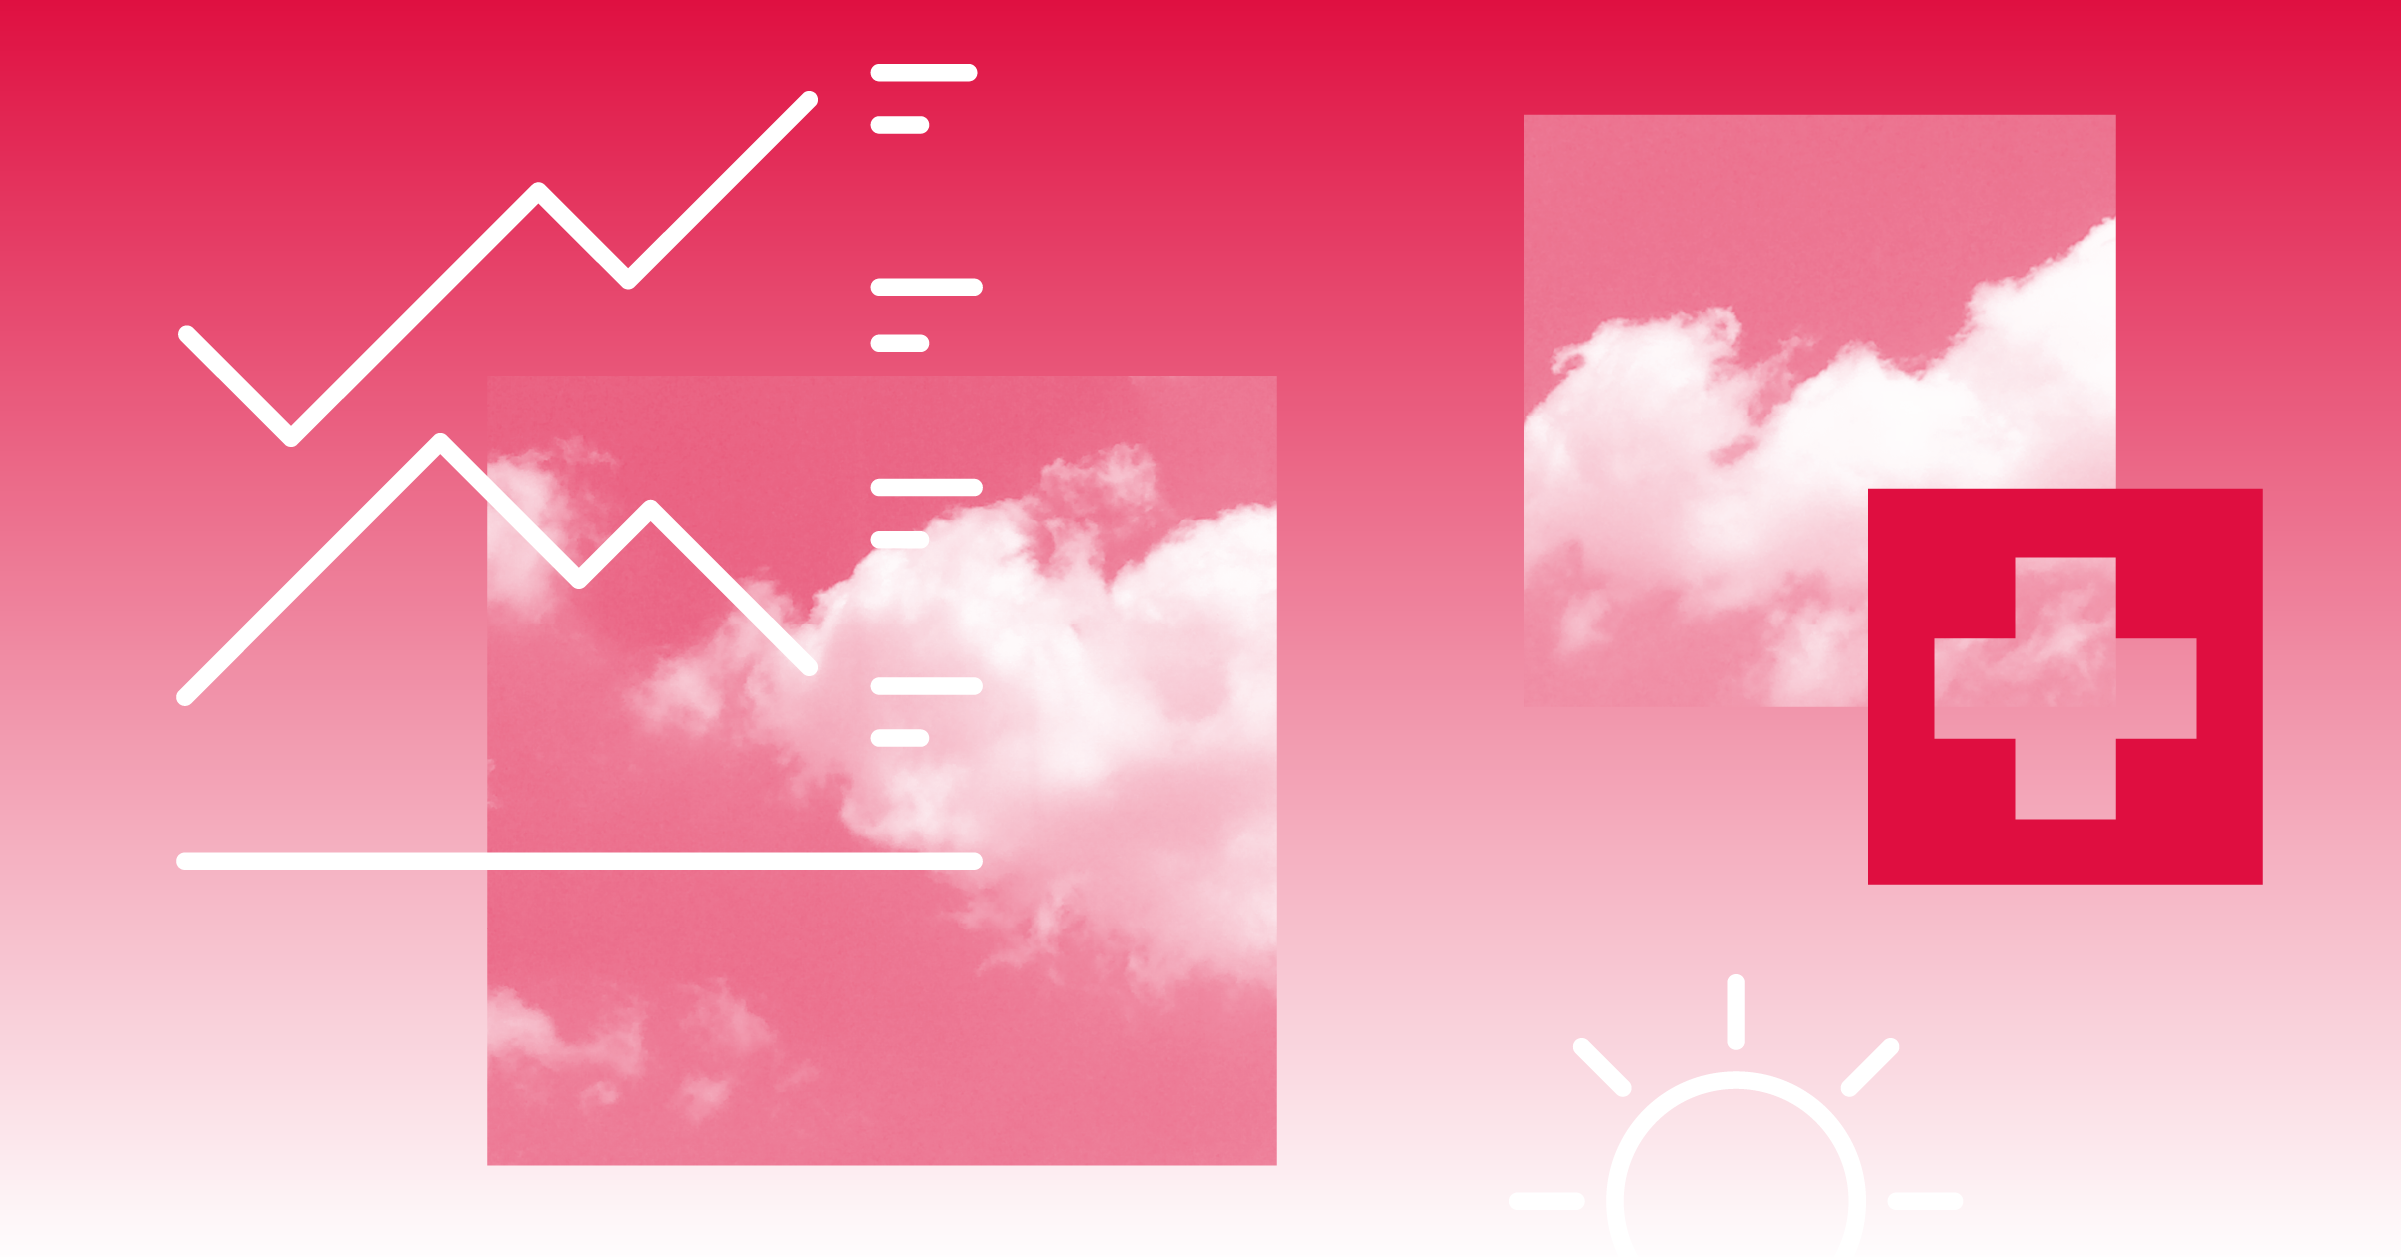 Images of clouds and a stock chart over a red background